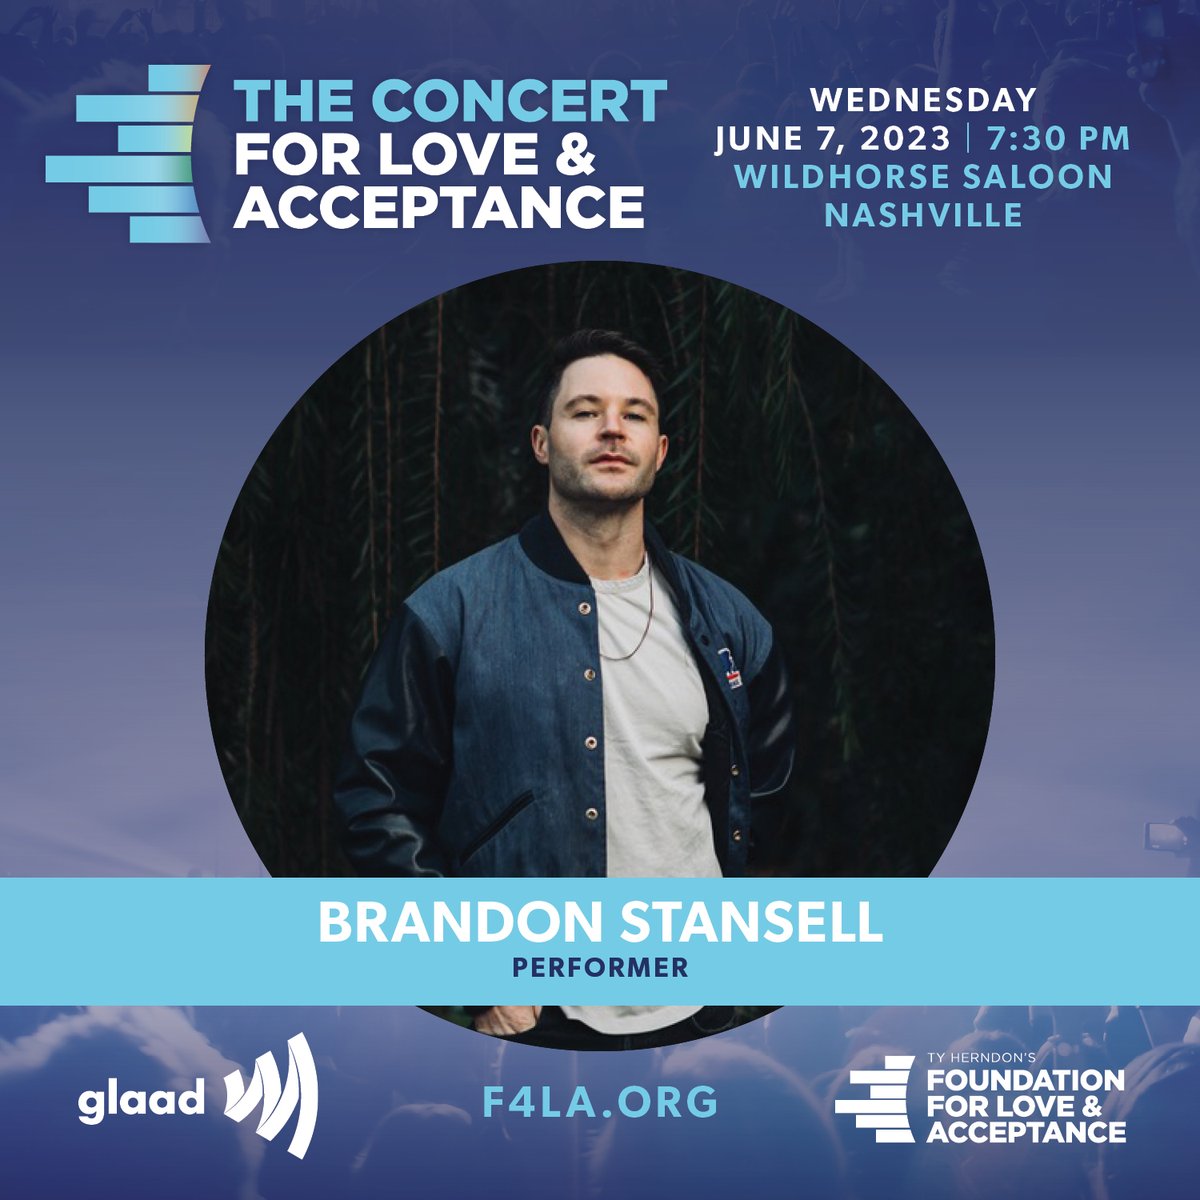 Beyond excited to be a part of this lineup for the @glaad + @TyHerndoncom Concert For Love + Acceptance. June 7 in Nashville - I hope you'll come see us! Tickets available at F4LA.org